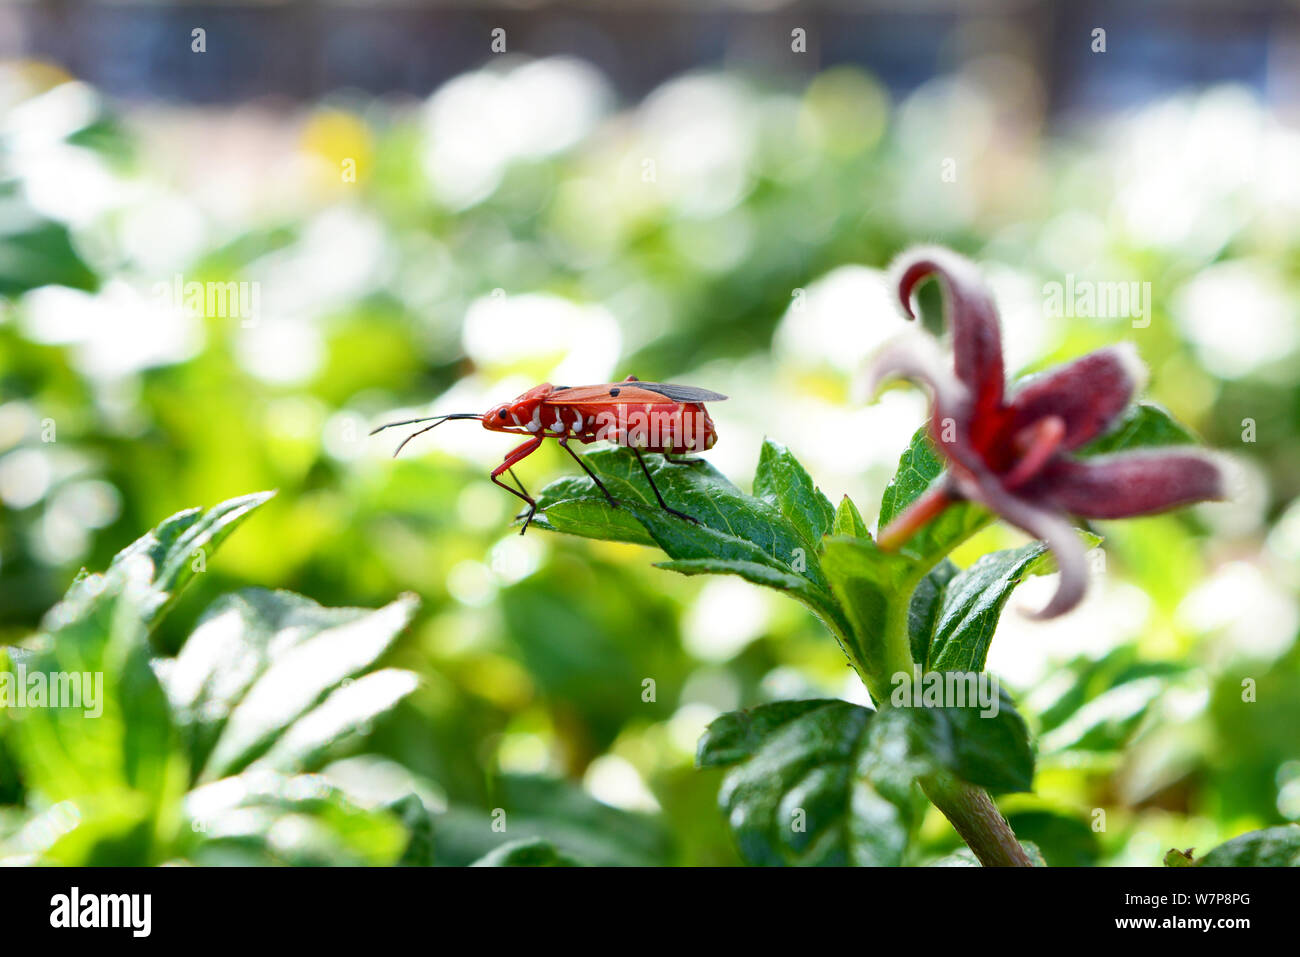 Red cotton stainer ( Dysdercus cingulatus ) in a garden with red flower on a green blur background Stock Photo